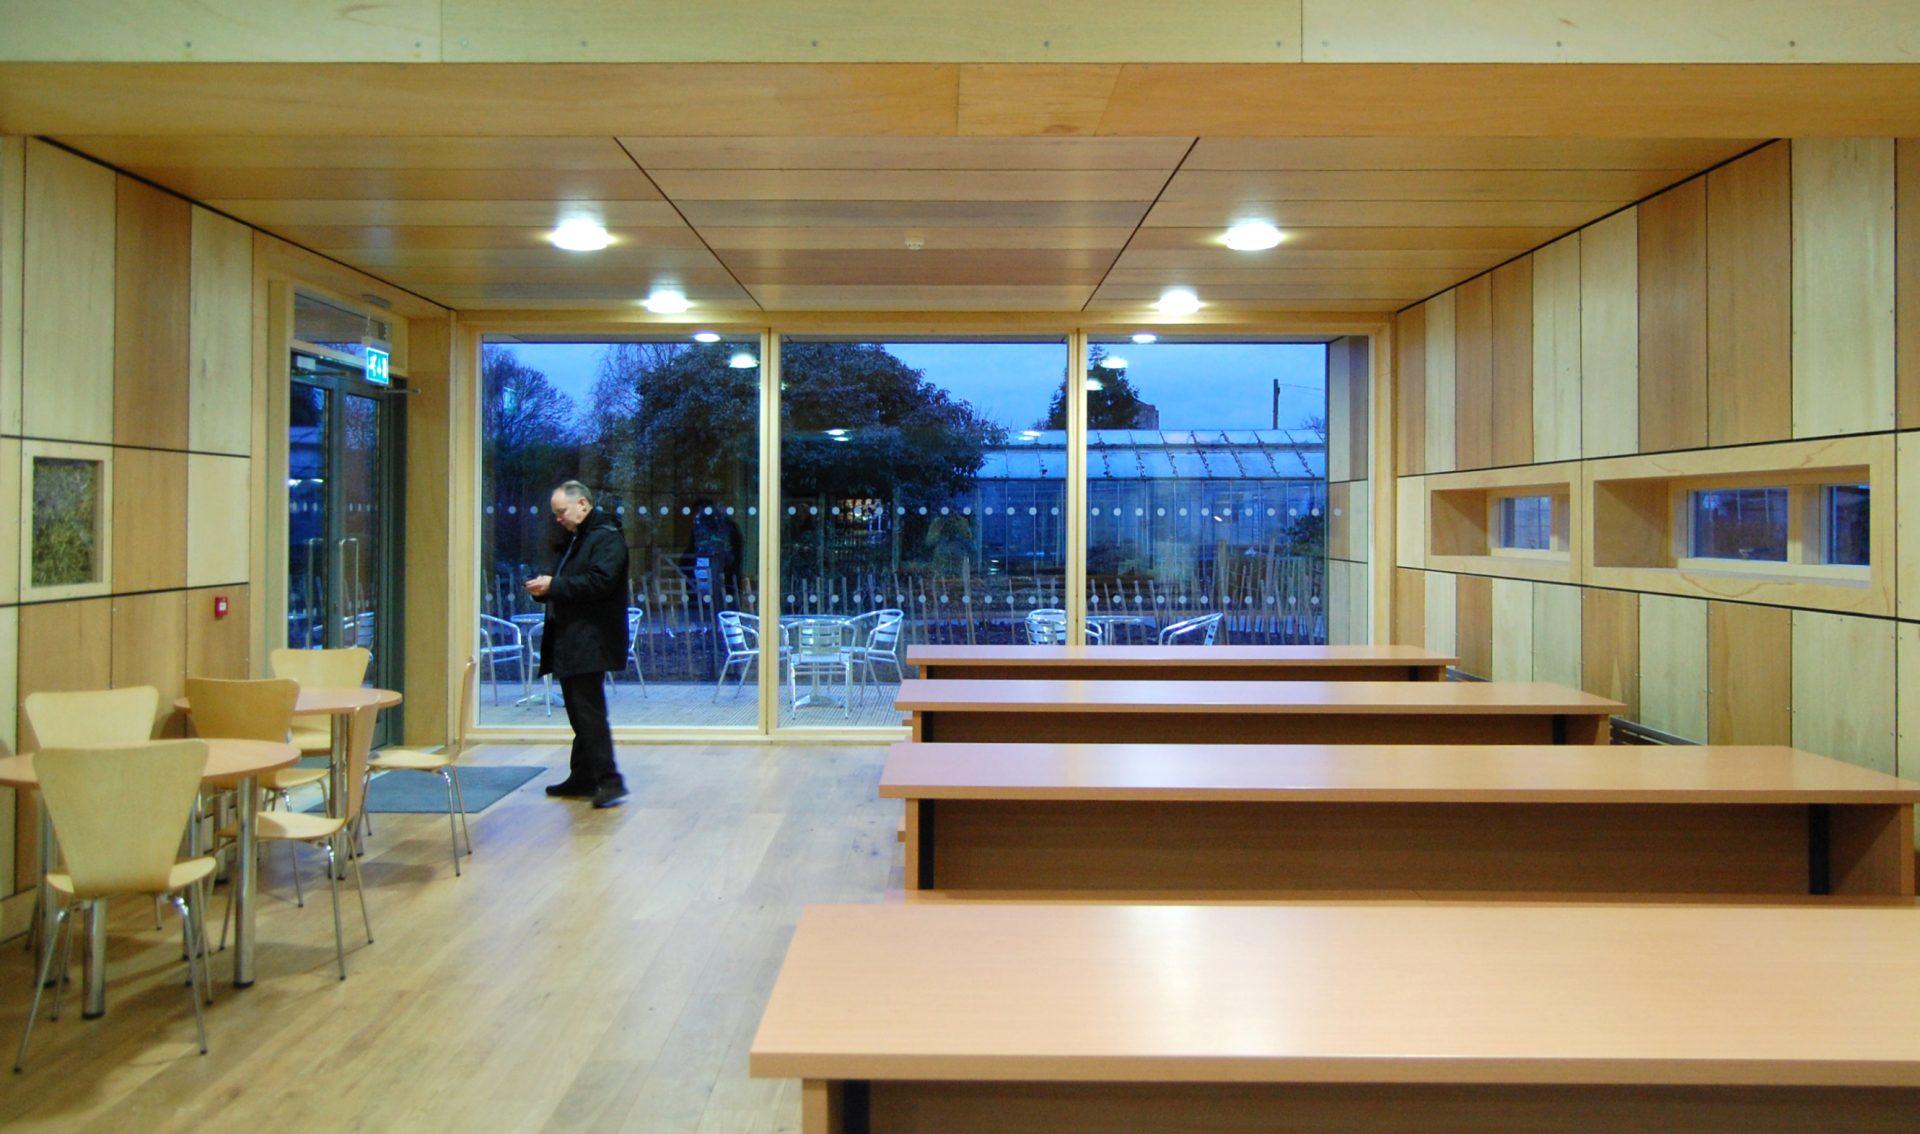 Straw Bale Cafe Interior showing plywood cladding